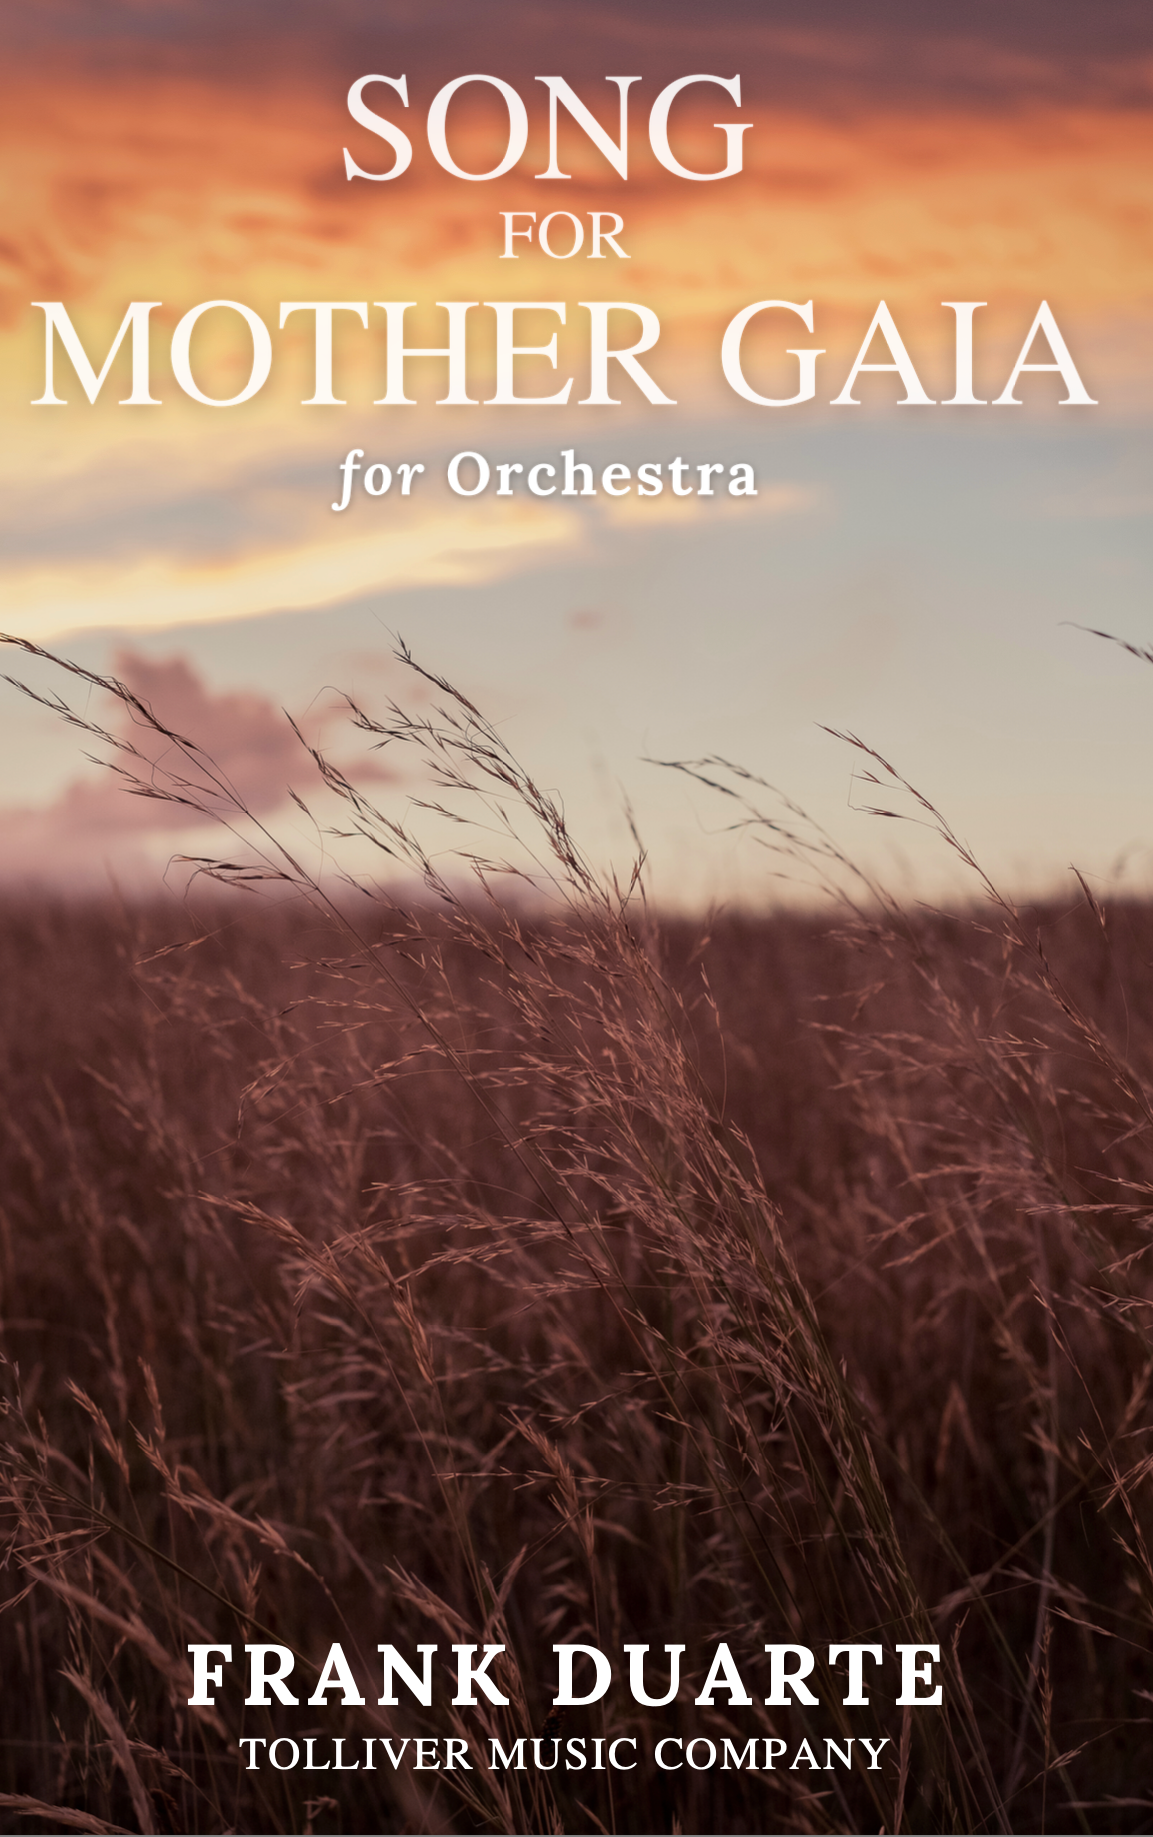 Symphony Orchestra - Intermediate - Song For Mother Gaia